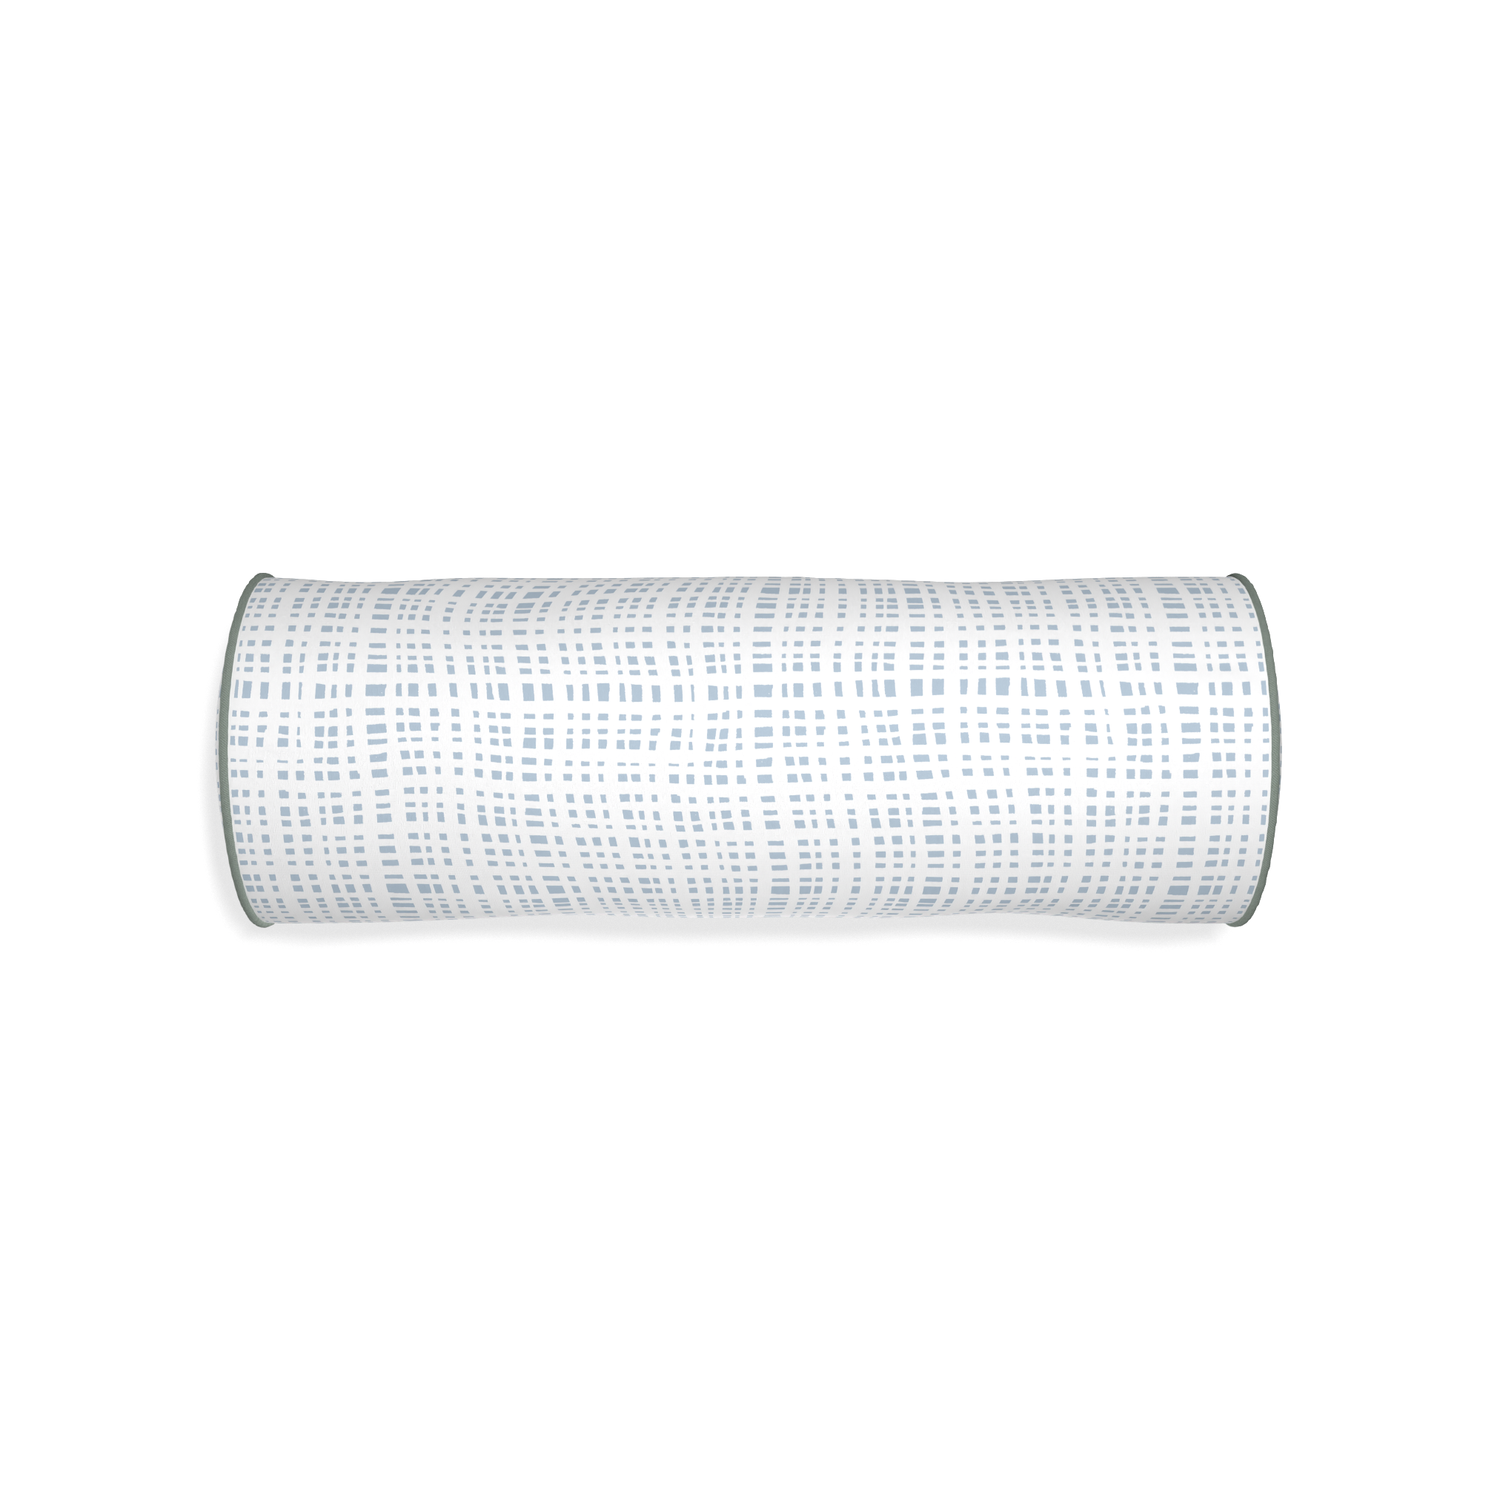 Bolster ginger custom plaid sky bluepillow with sage piping on white background